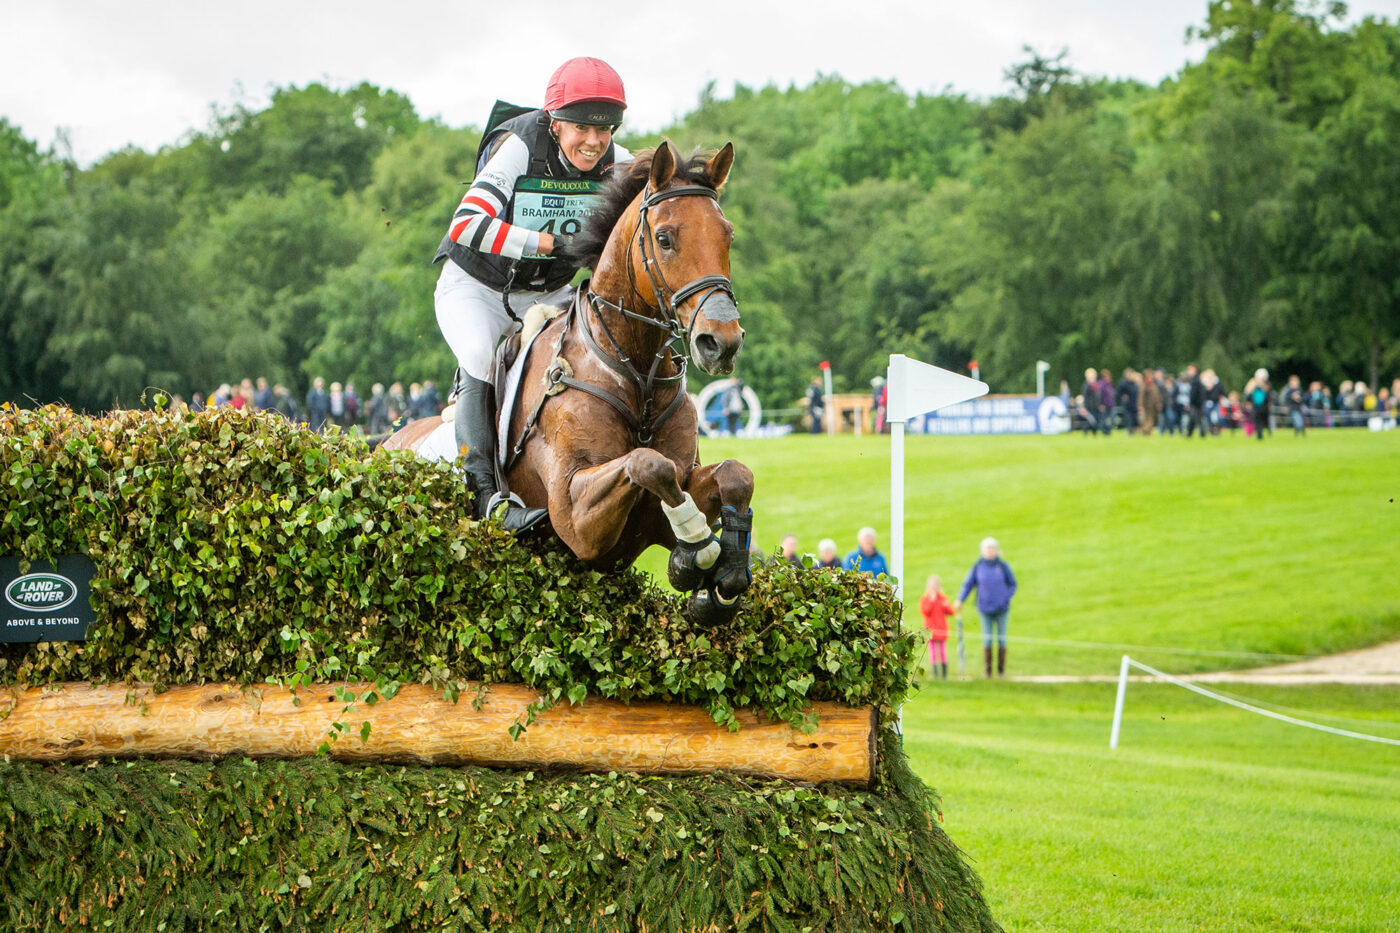 Lucy Jackson and Superstition at Bramham Horse Trials 2019